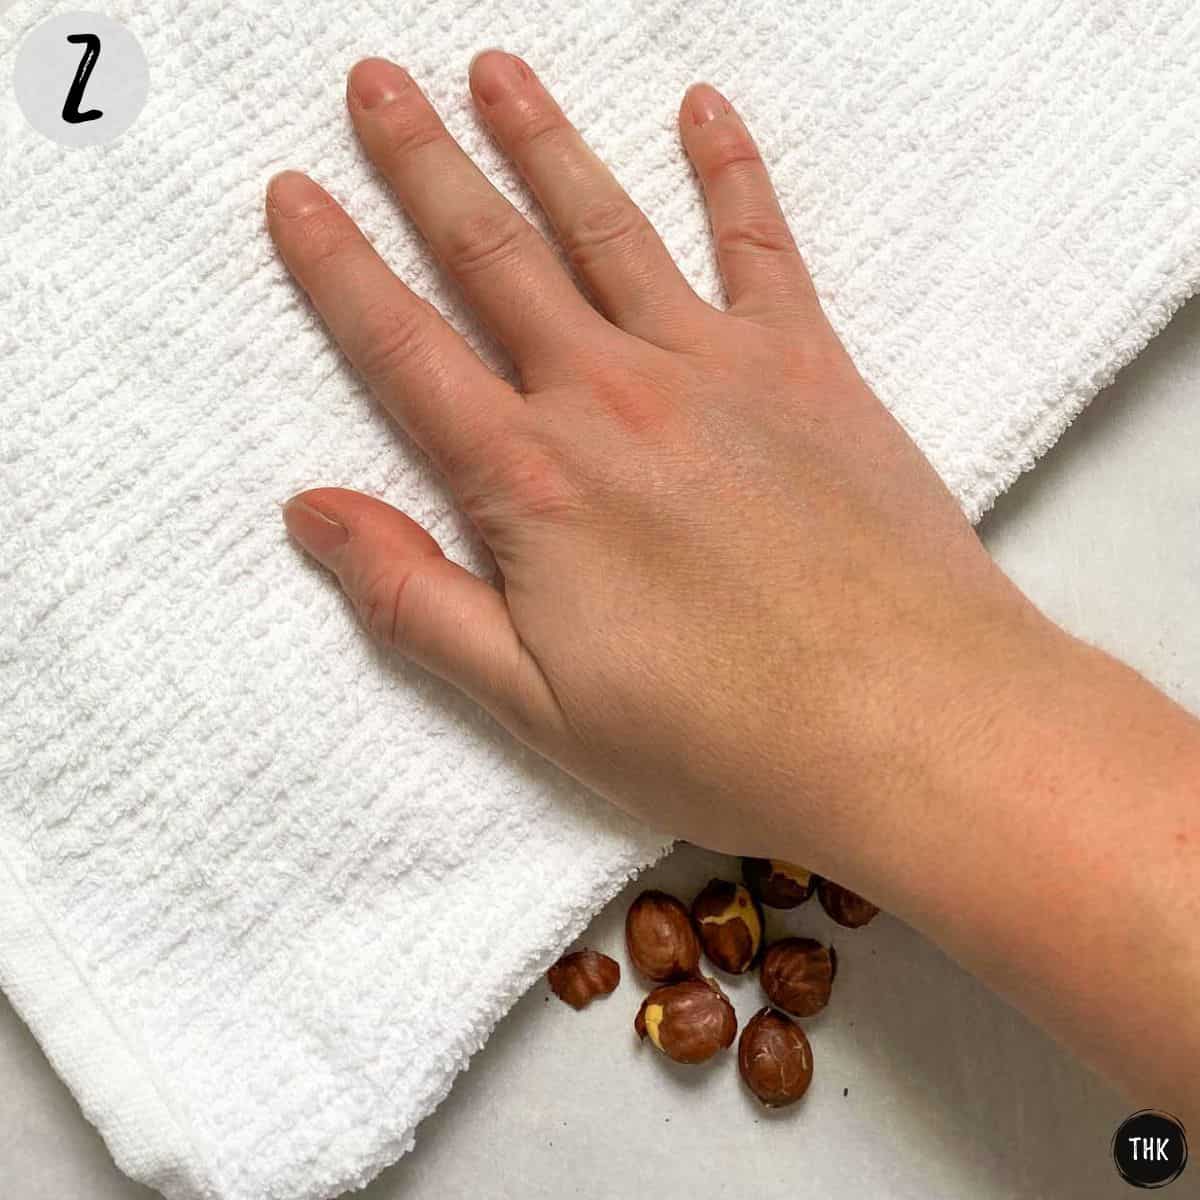 Dish towel being rubbed over tray of roasted hazelnuts.